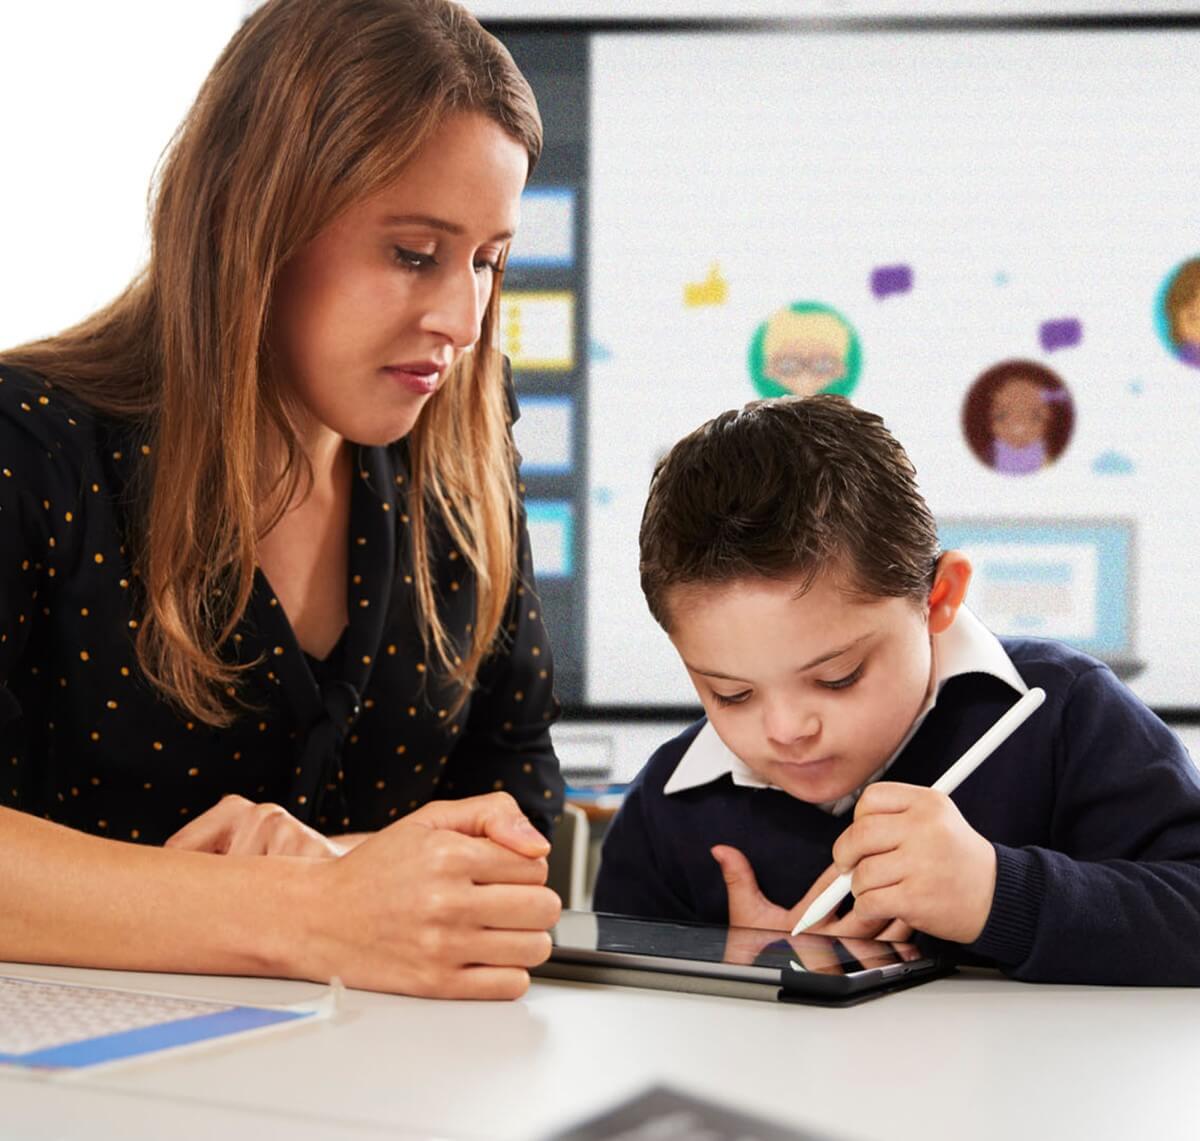 An inclusive education scene where a teacher guides a young student through an interactive lesson on a tablet.